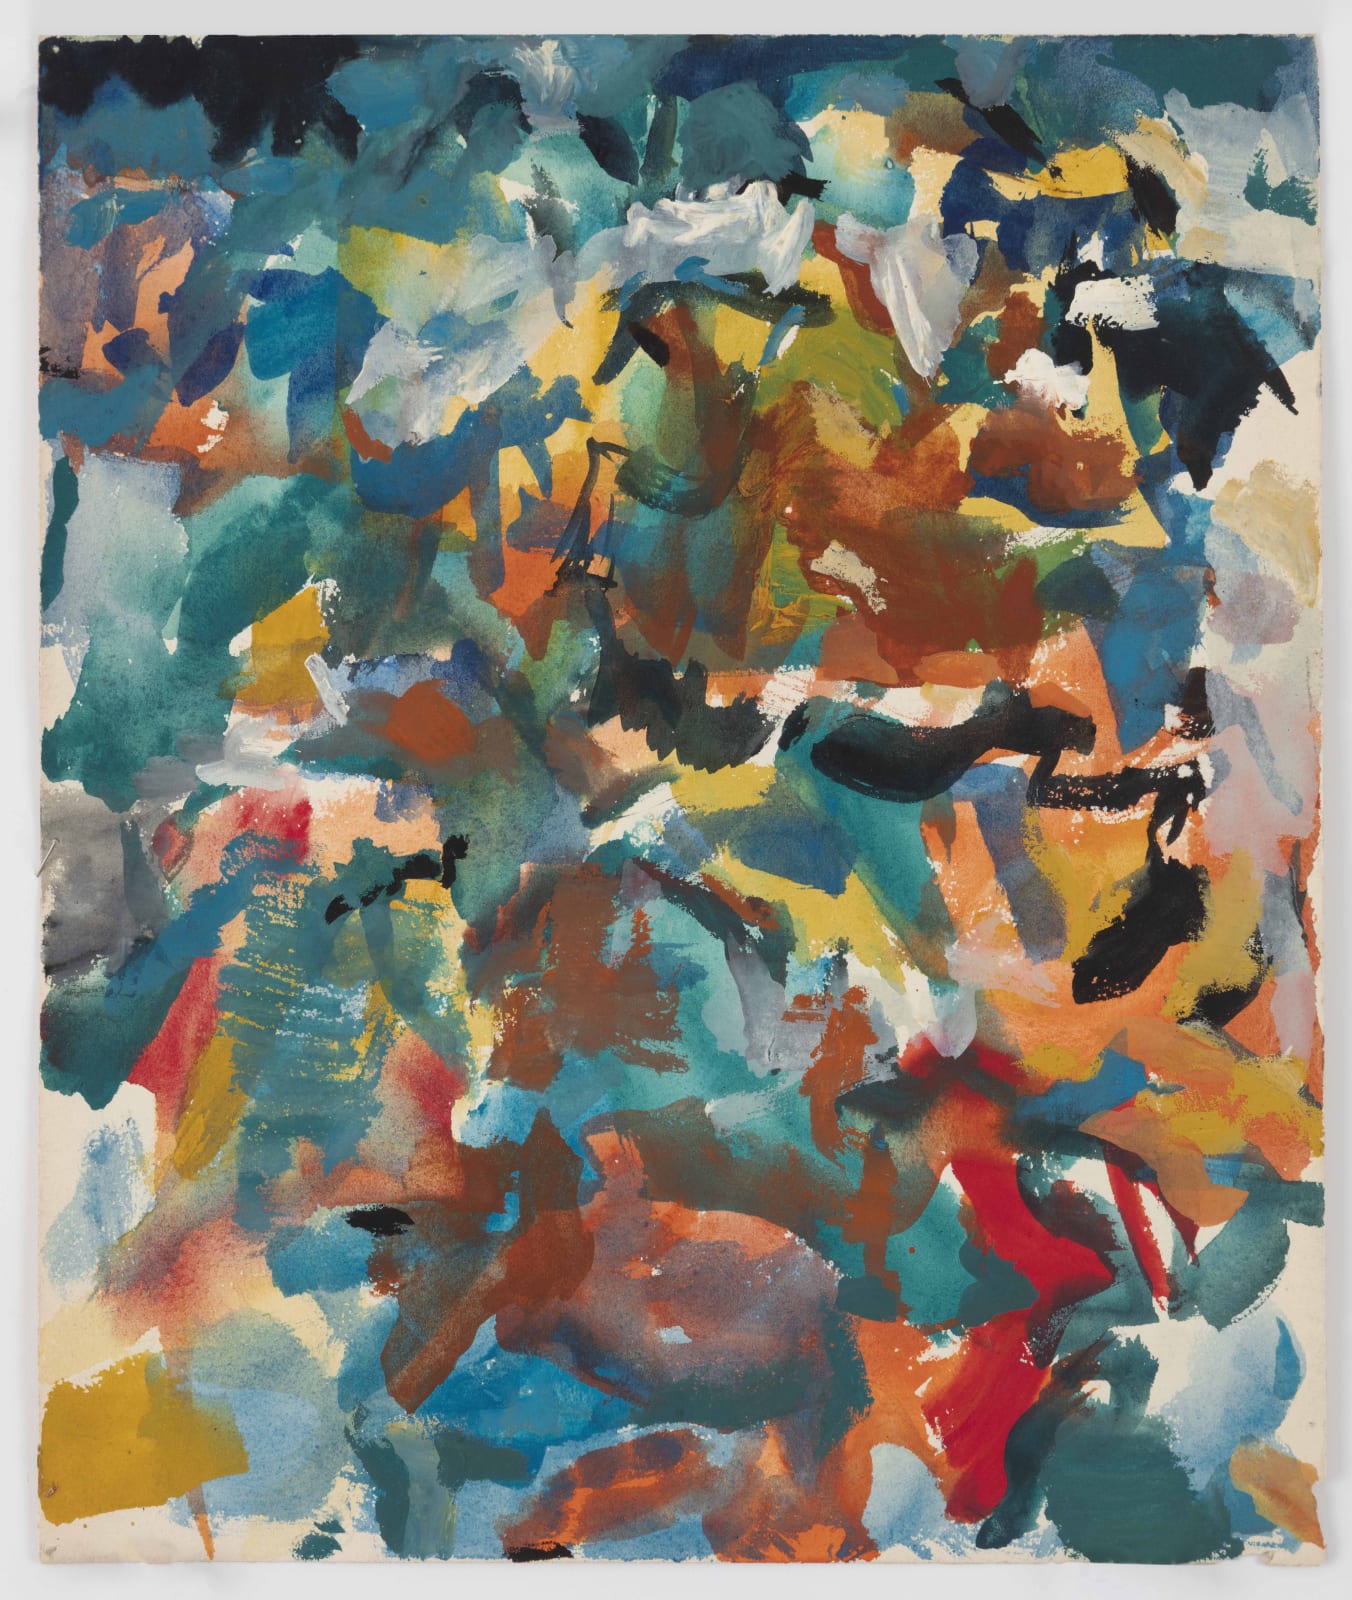 Shirley Jaffe Untitled, 1958 ca. Mixed media on paper 30,5 x 26 cm (12 x 10 1/4 in.)